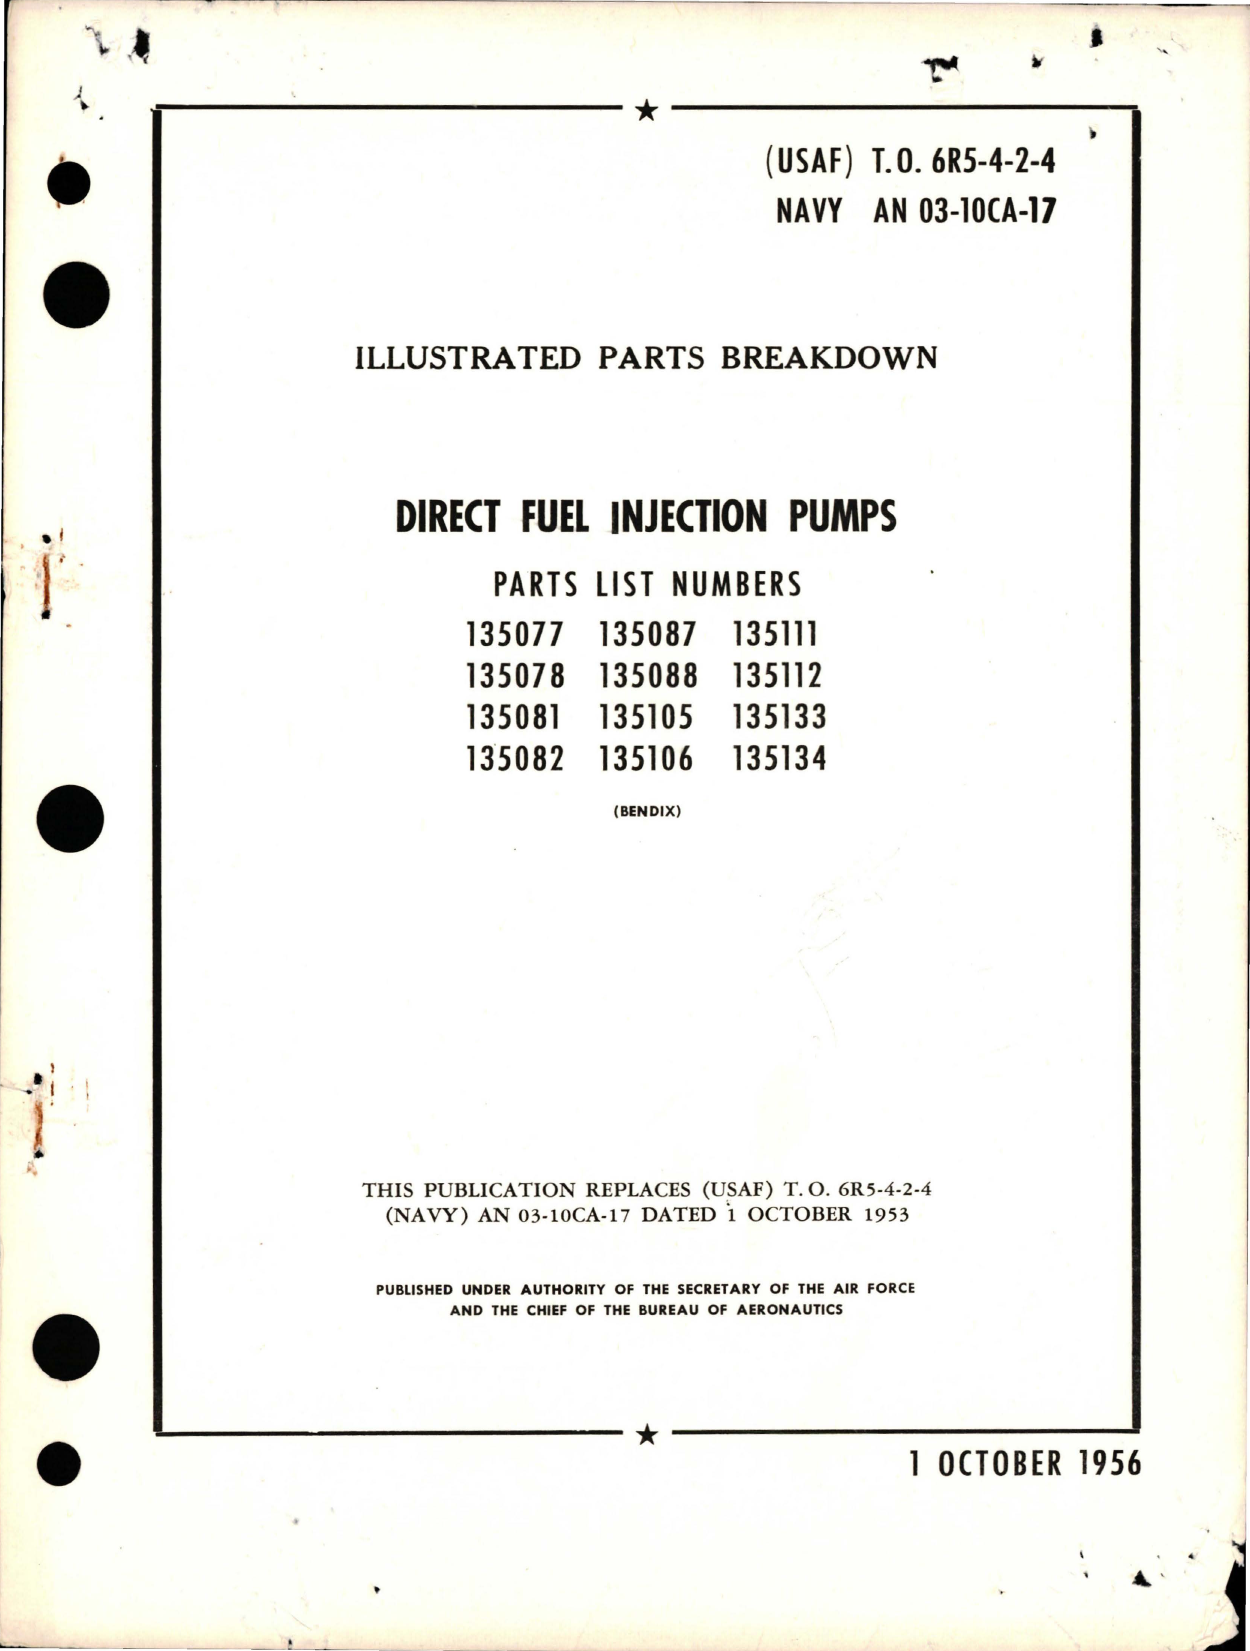 Sample page 1 from AirCorps Library document: Illustrated Parts Breakdown for Direct Fuel Injection Pumps